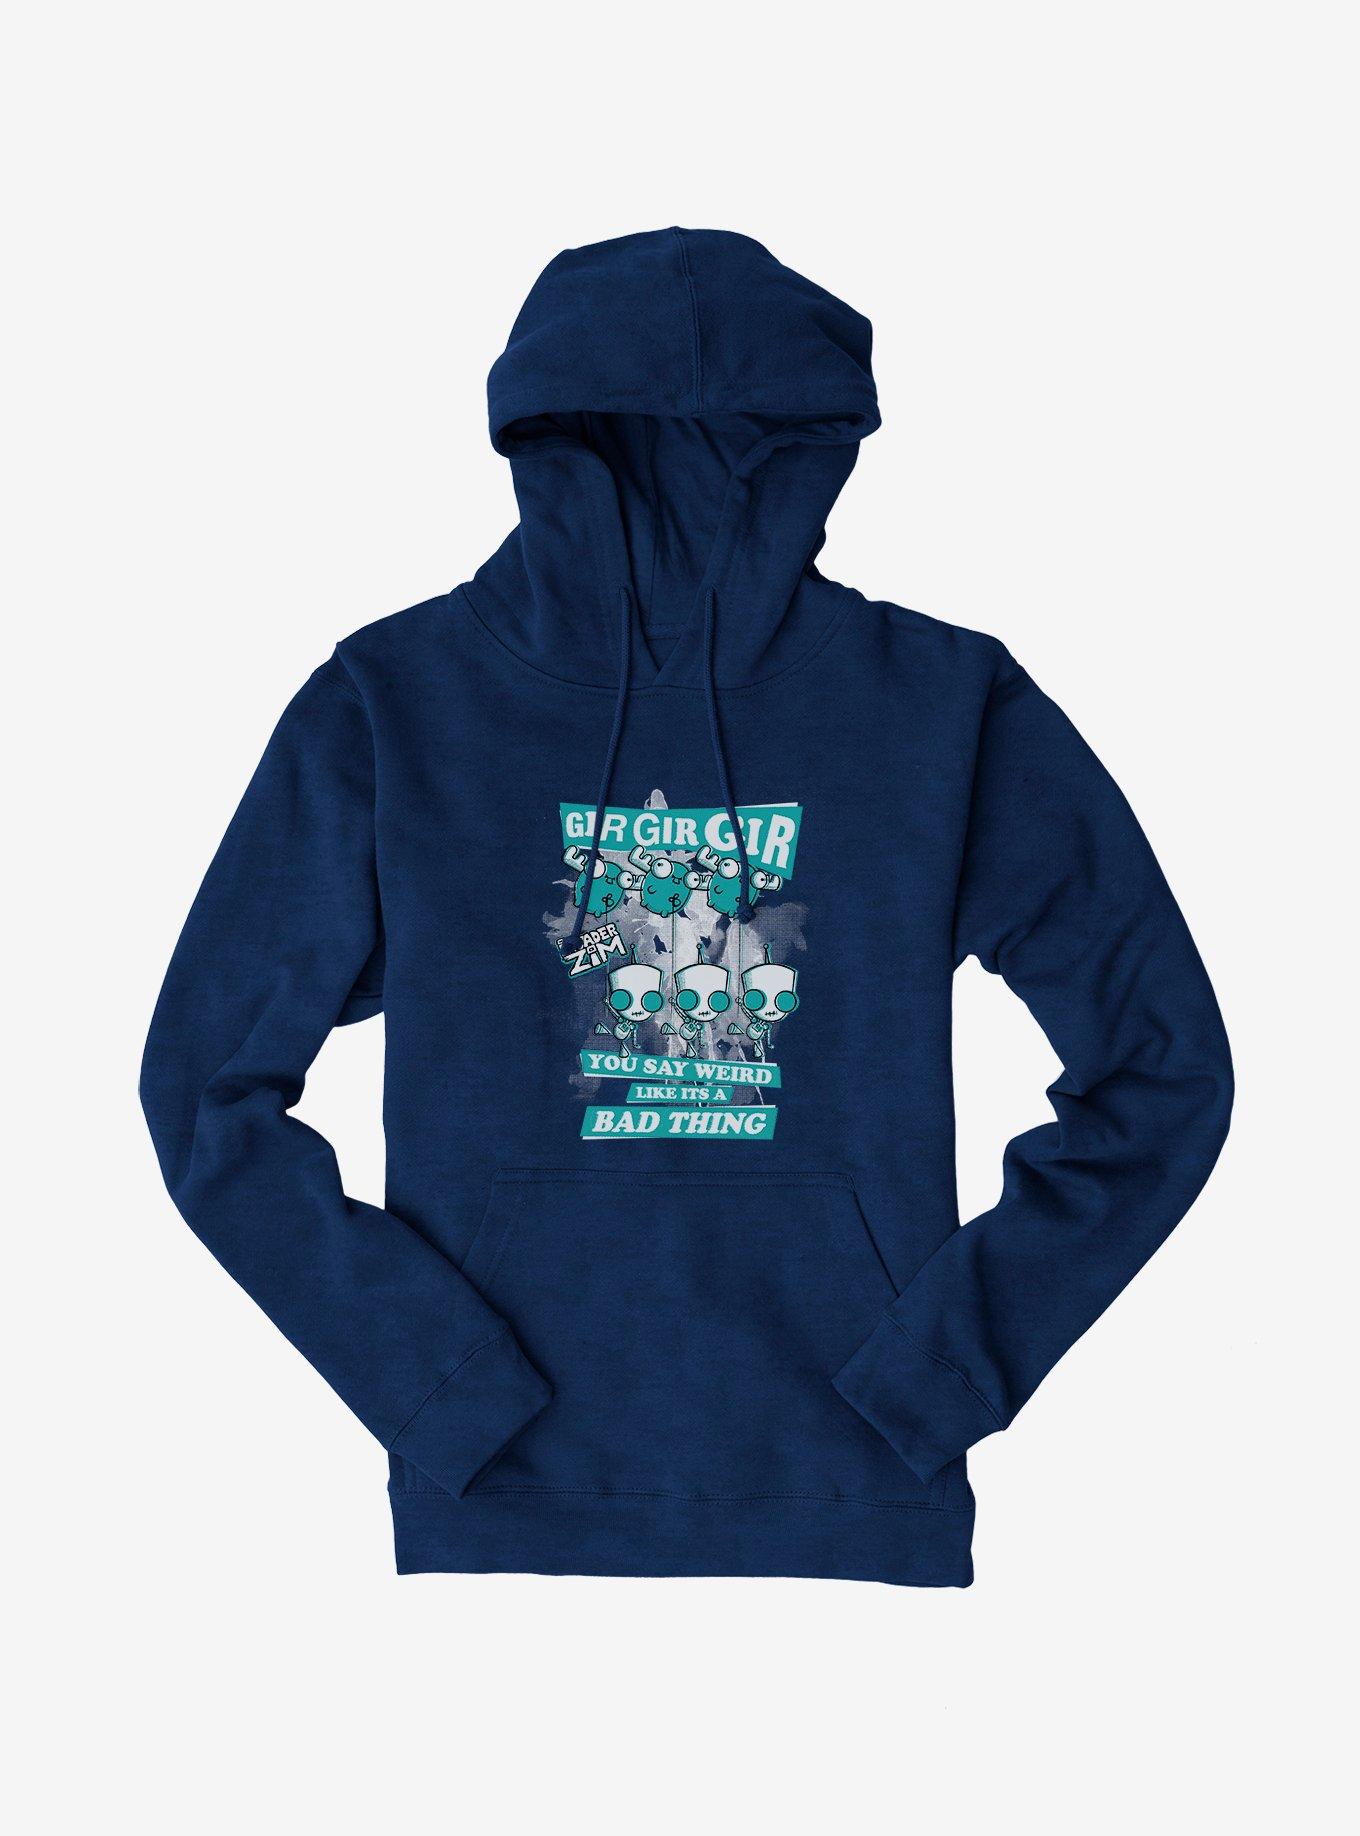 Invader Zim Weird Like It's A Bad Thing Hoodie | Hot Topic